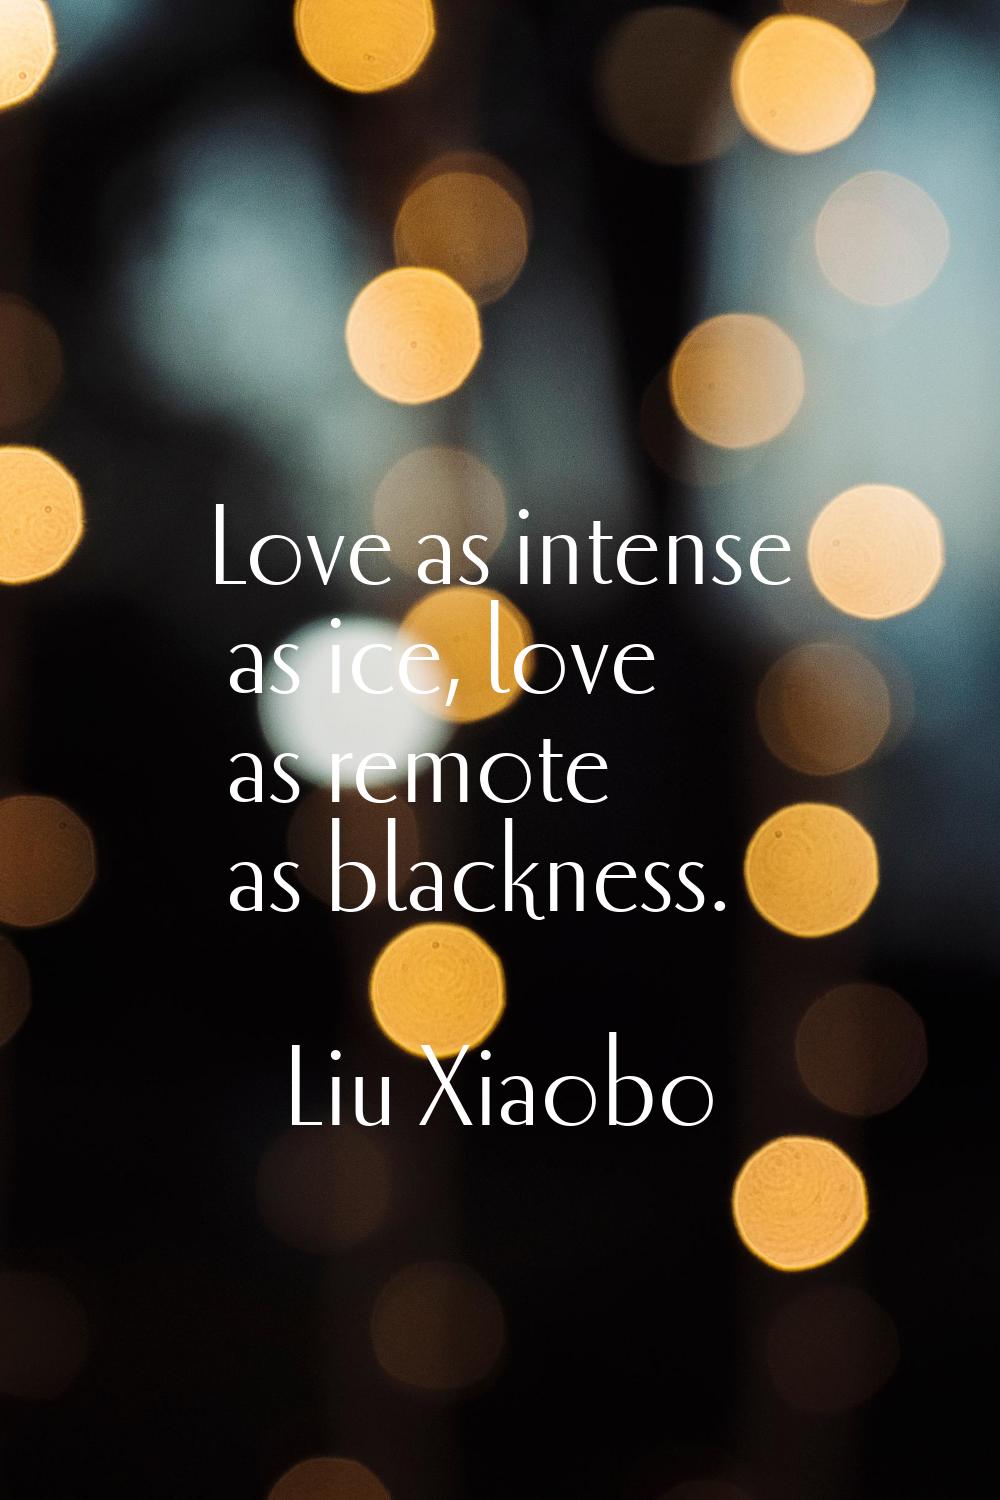 Love as intense as ice, love as remote as blackness.